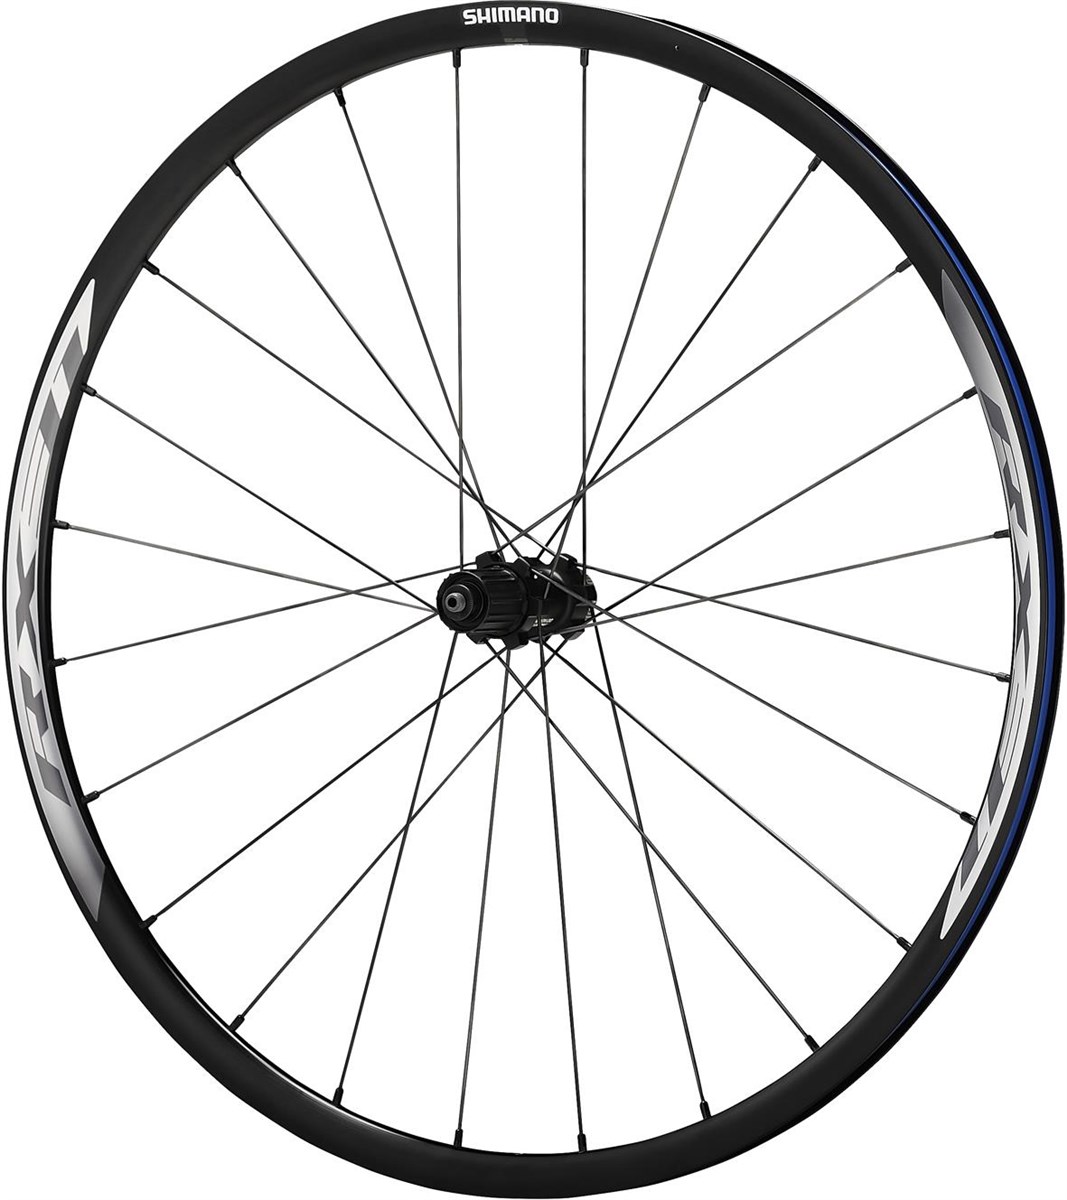 Shimano WH-RX31 Centre Lock Disc 700c Rear Wheel product image